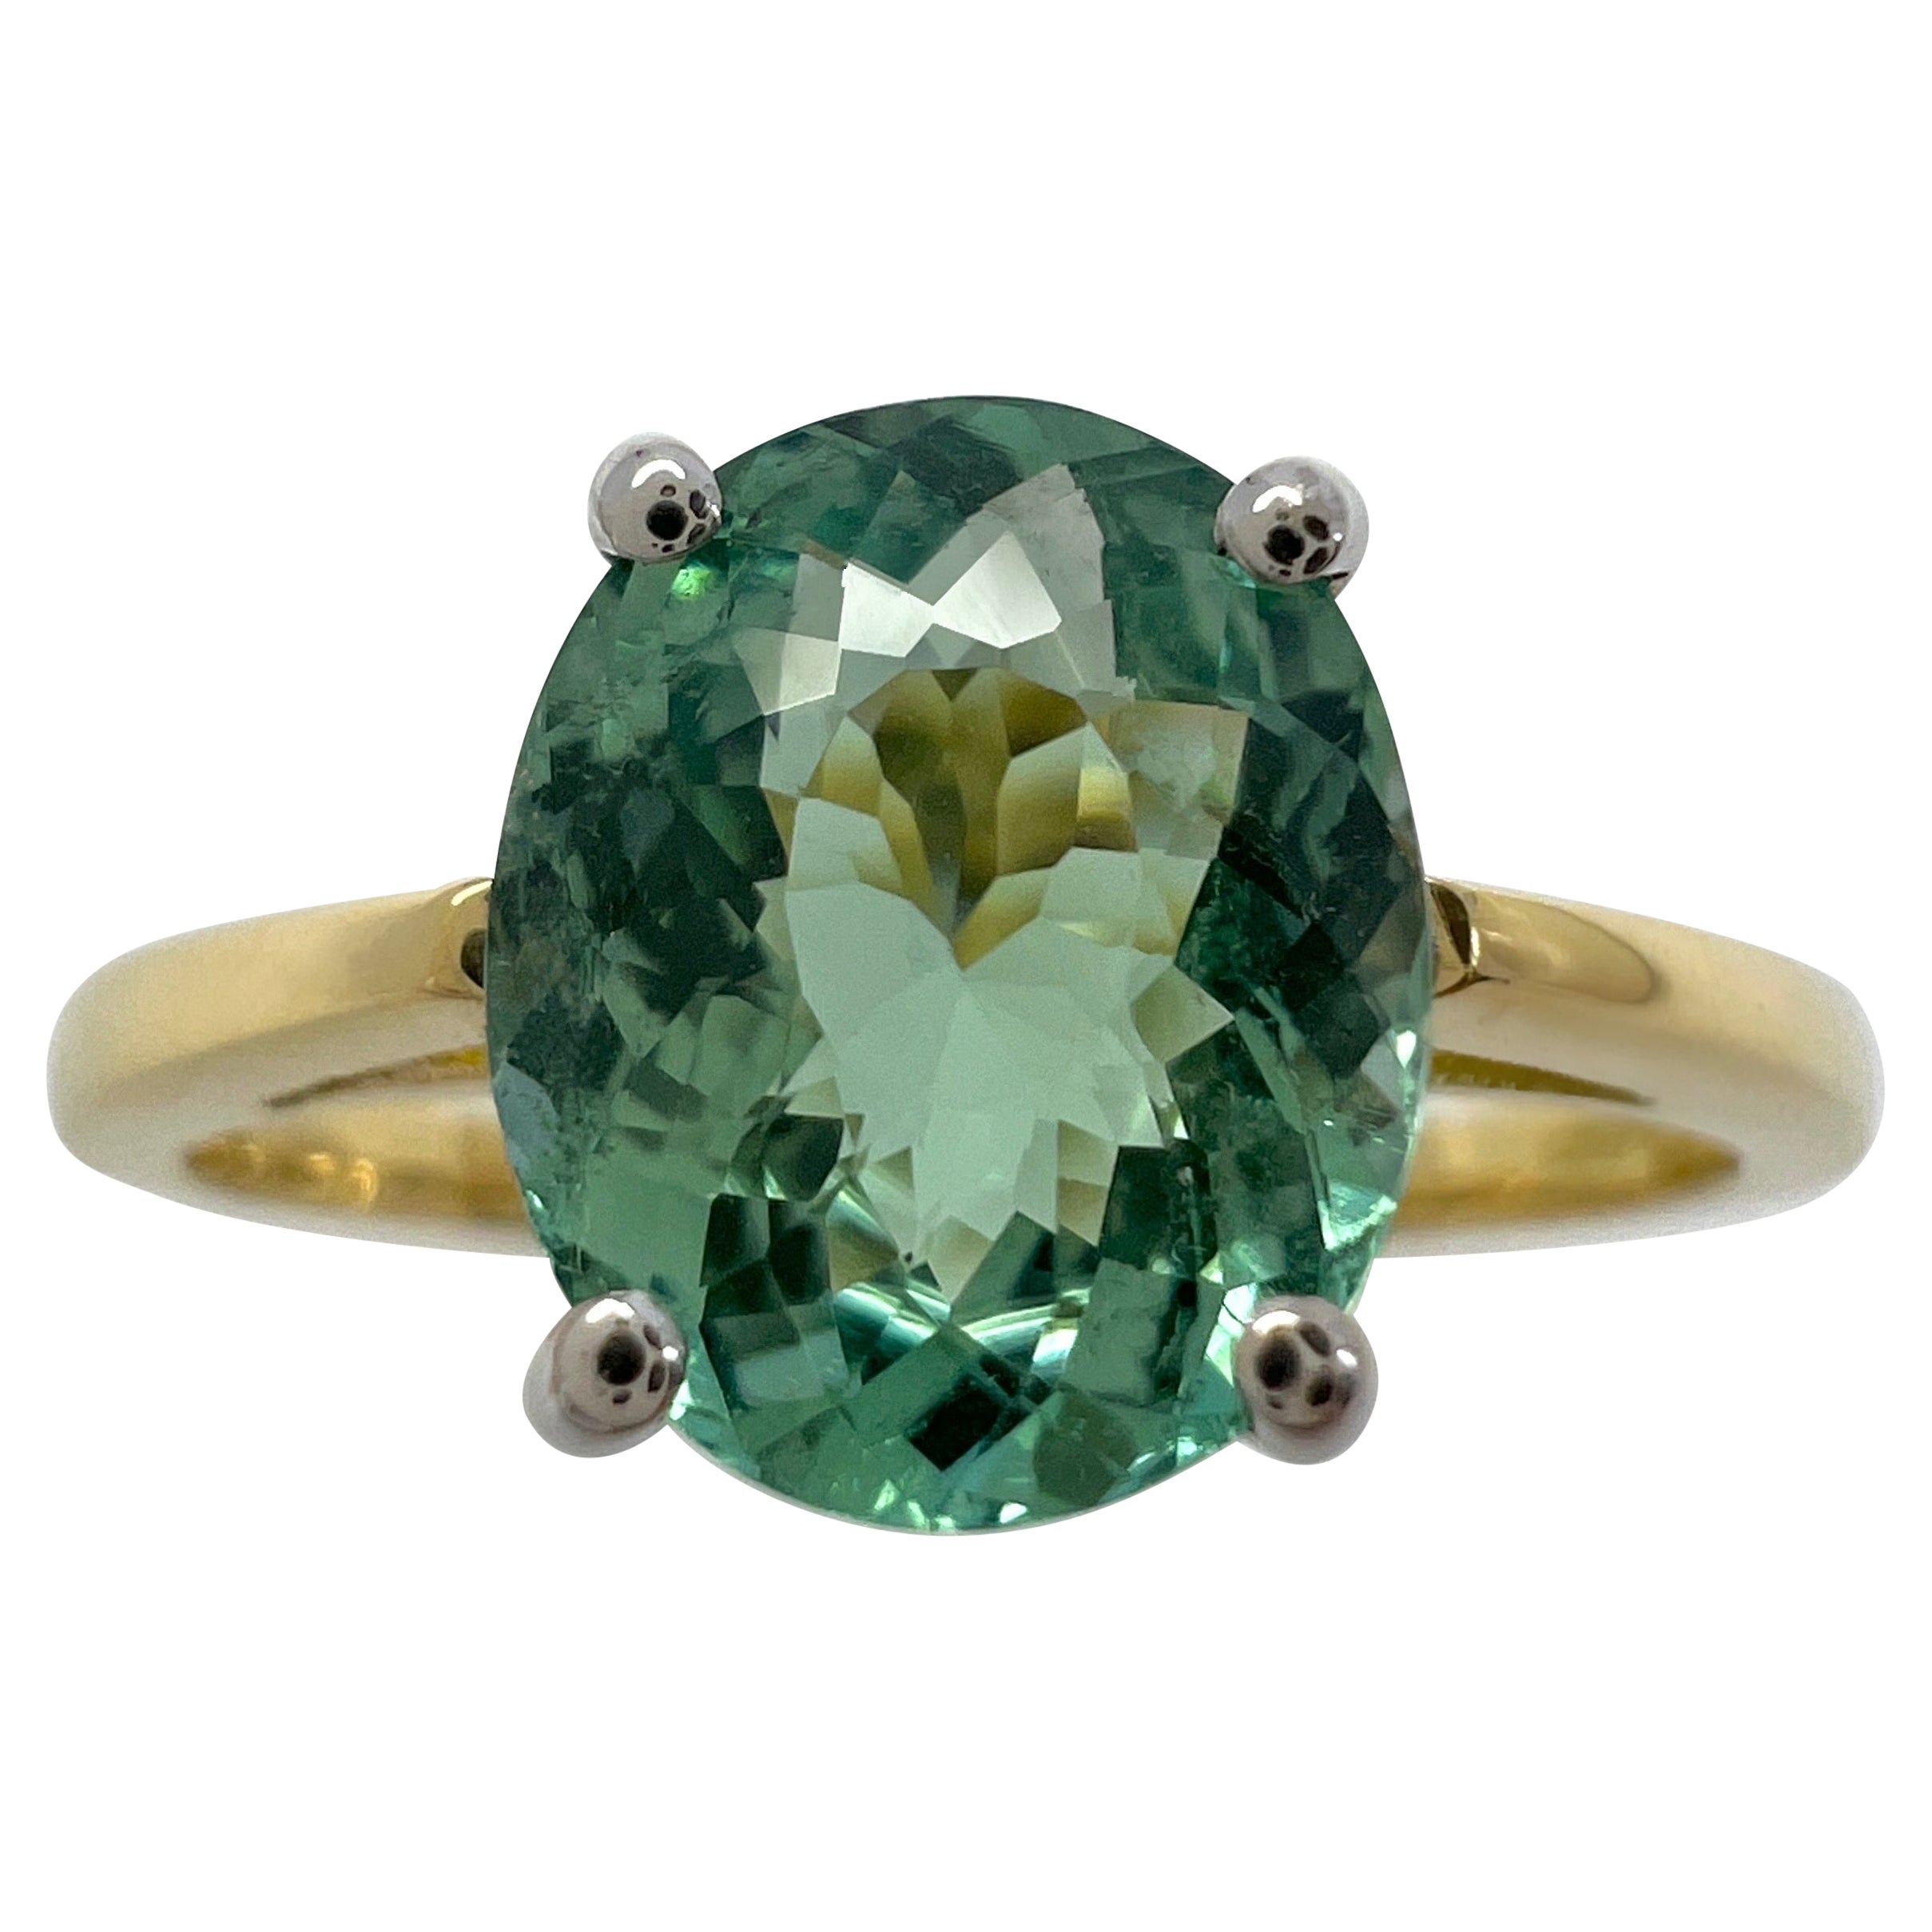 1.75ct Vivid Blue Green Tourmaline Oval Cut 18k Yellow White Gold Solitaire Ring